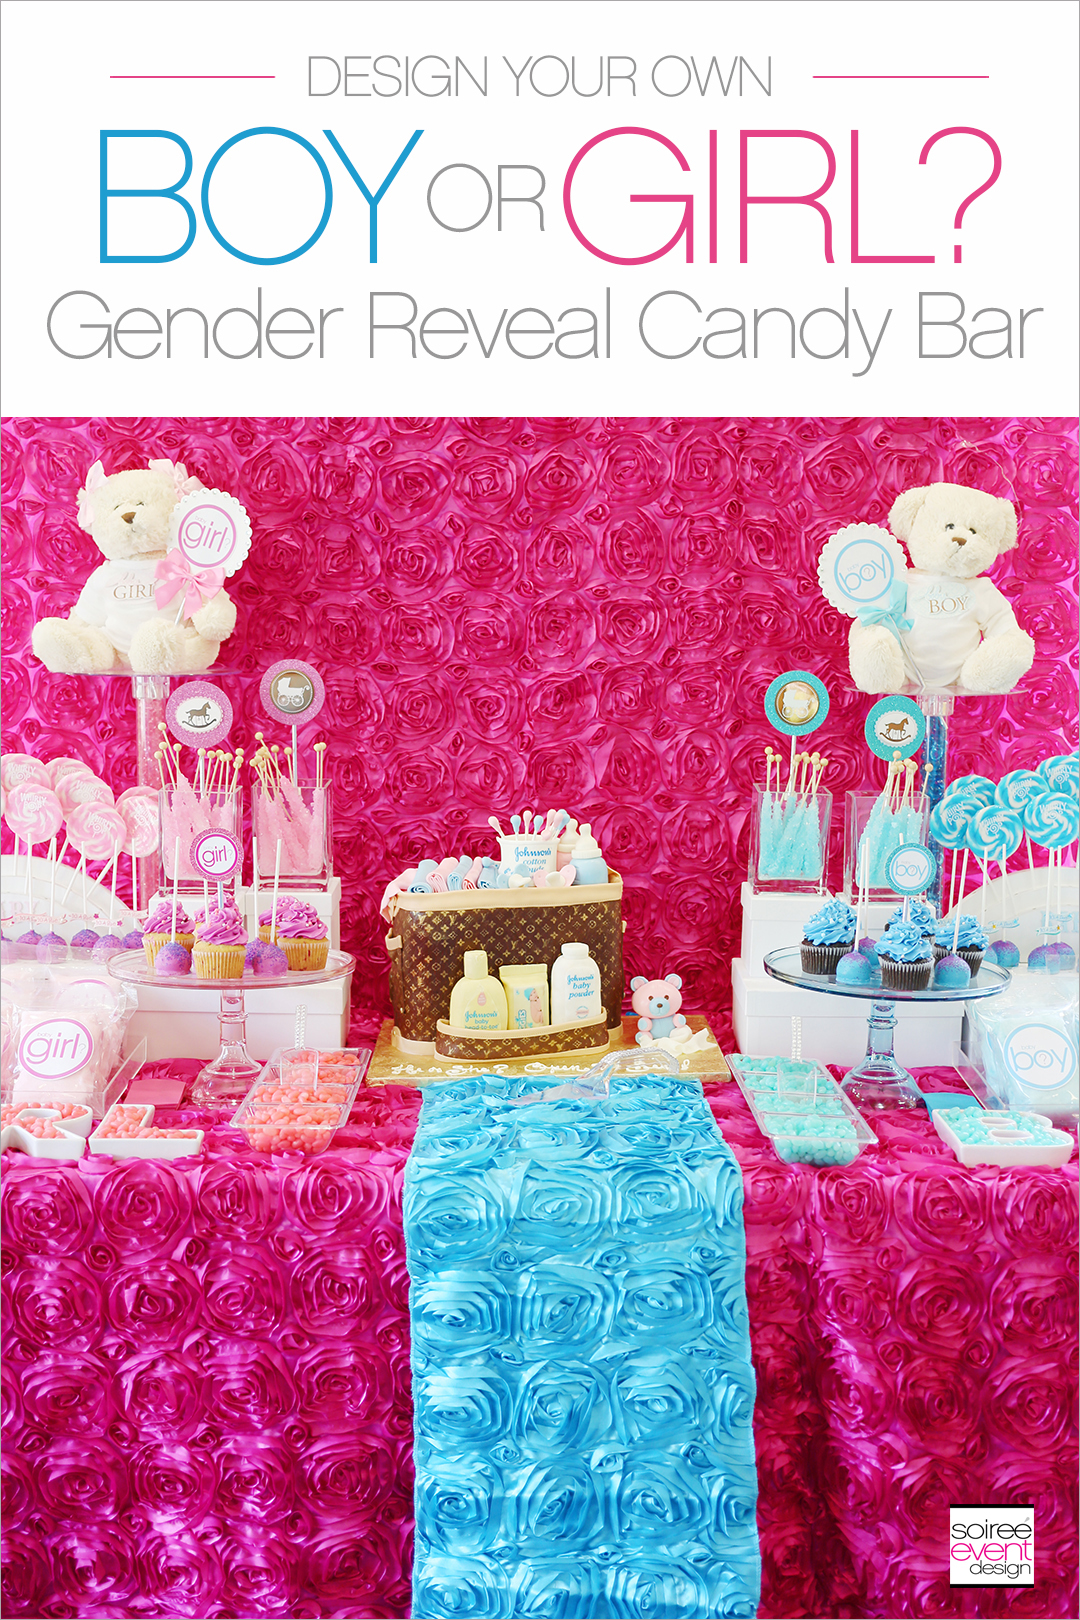 How to set up a Gender Reveal Party Candy Buffet